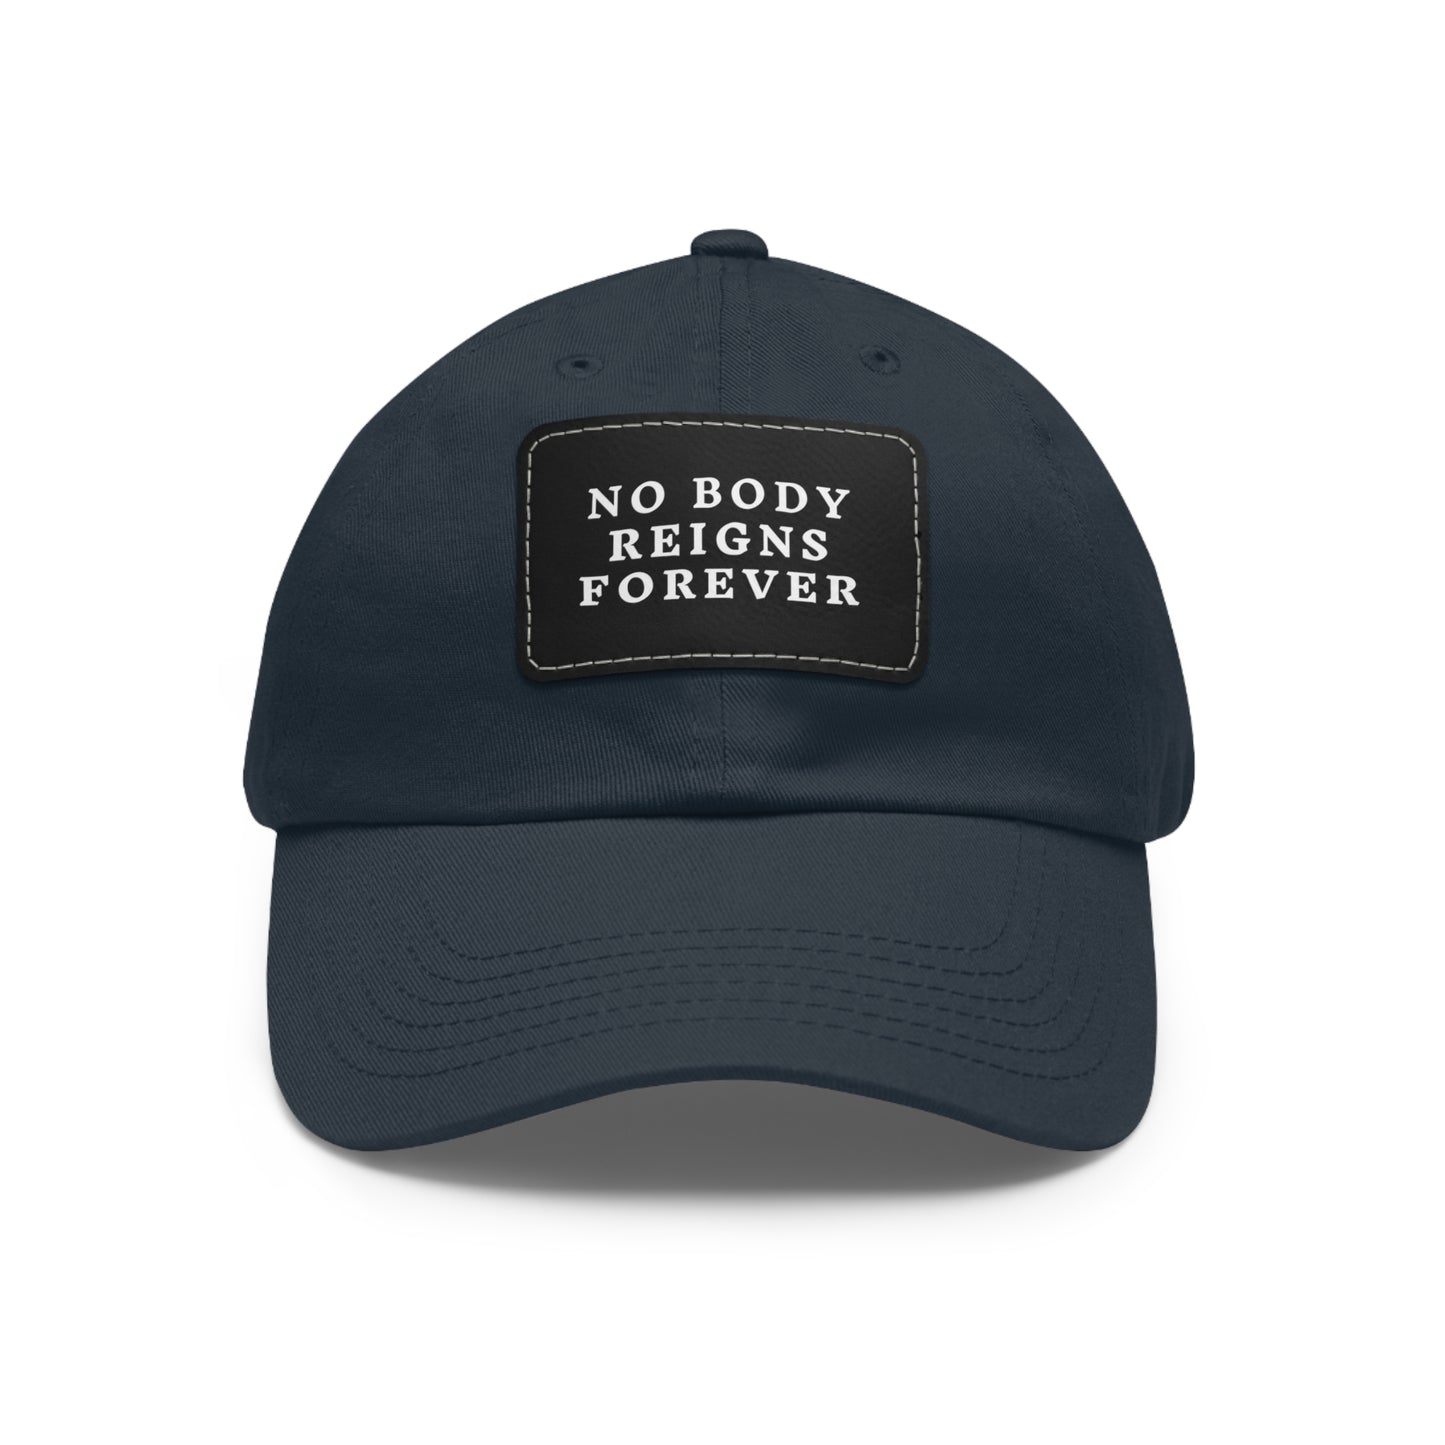 No Body Reigns Forever Hat w/ Leather Patch